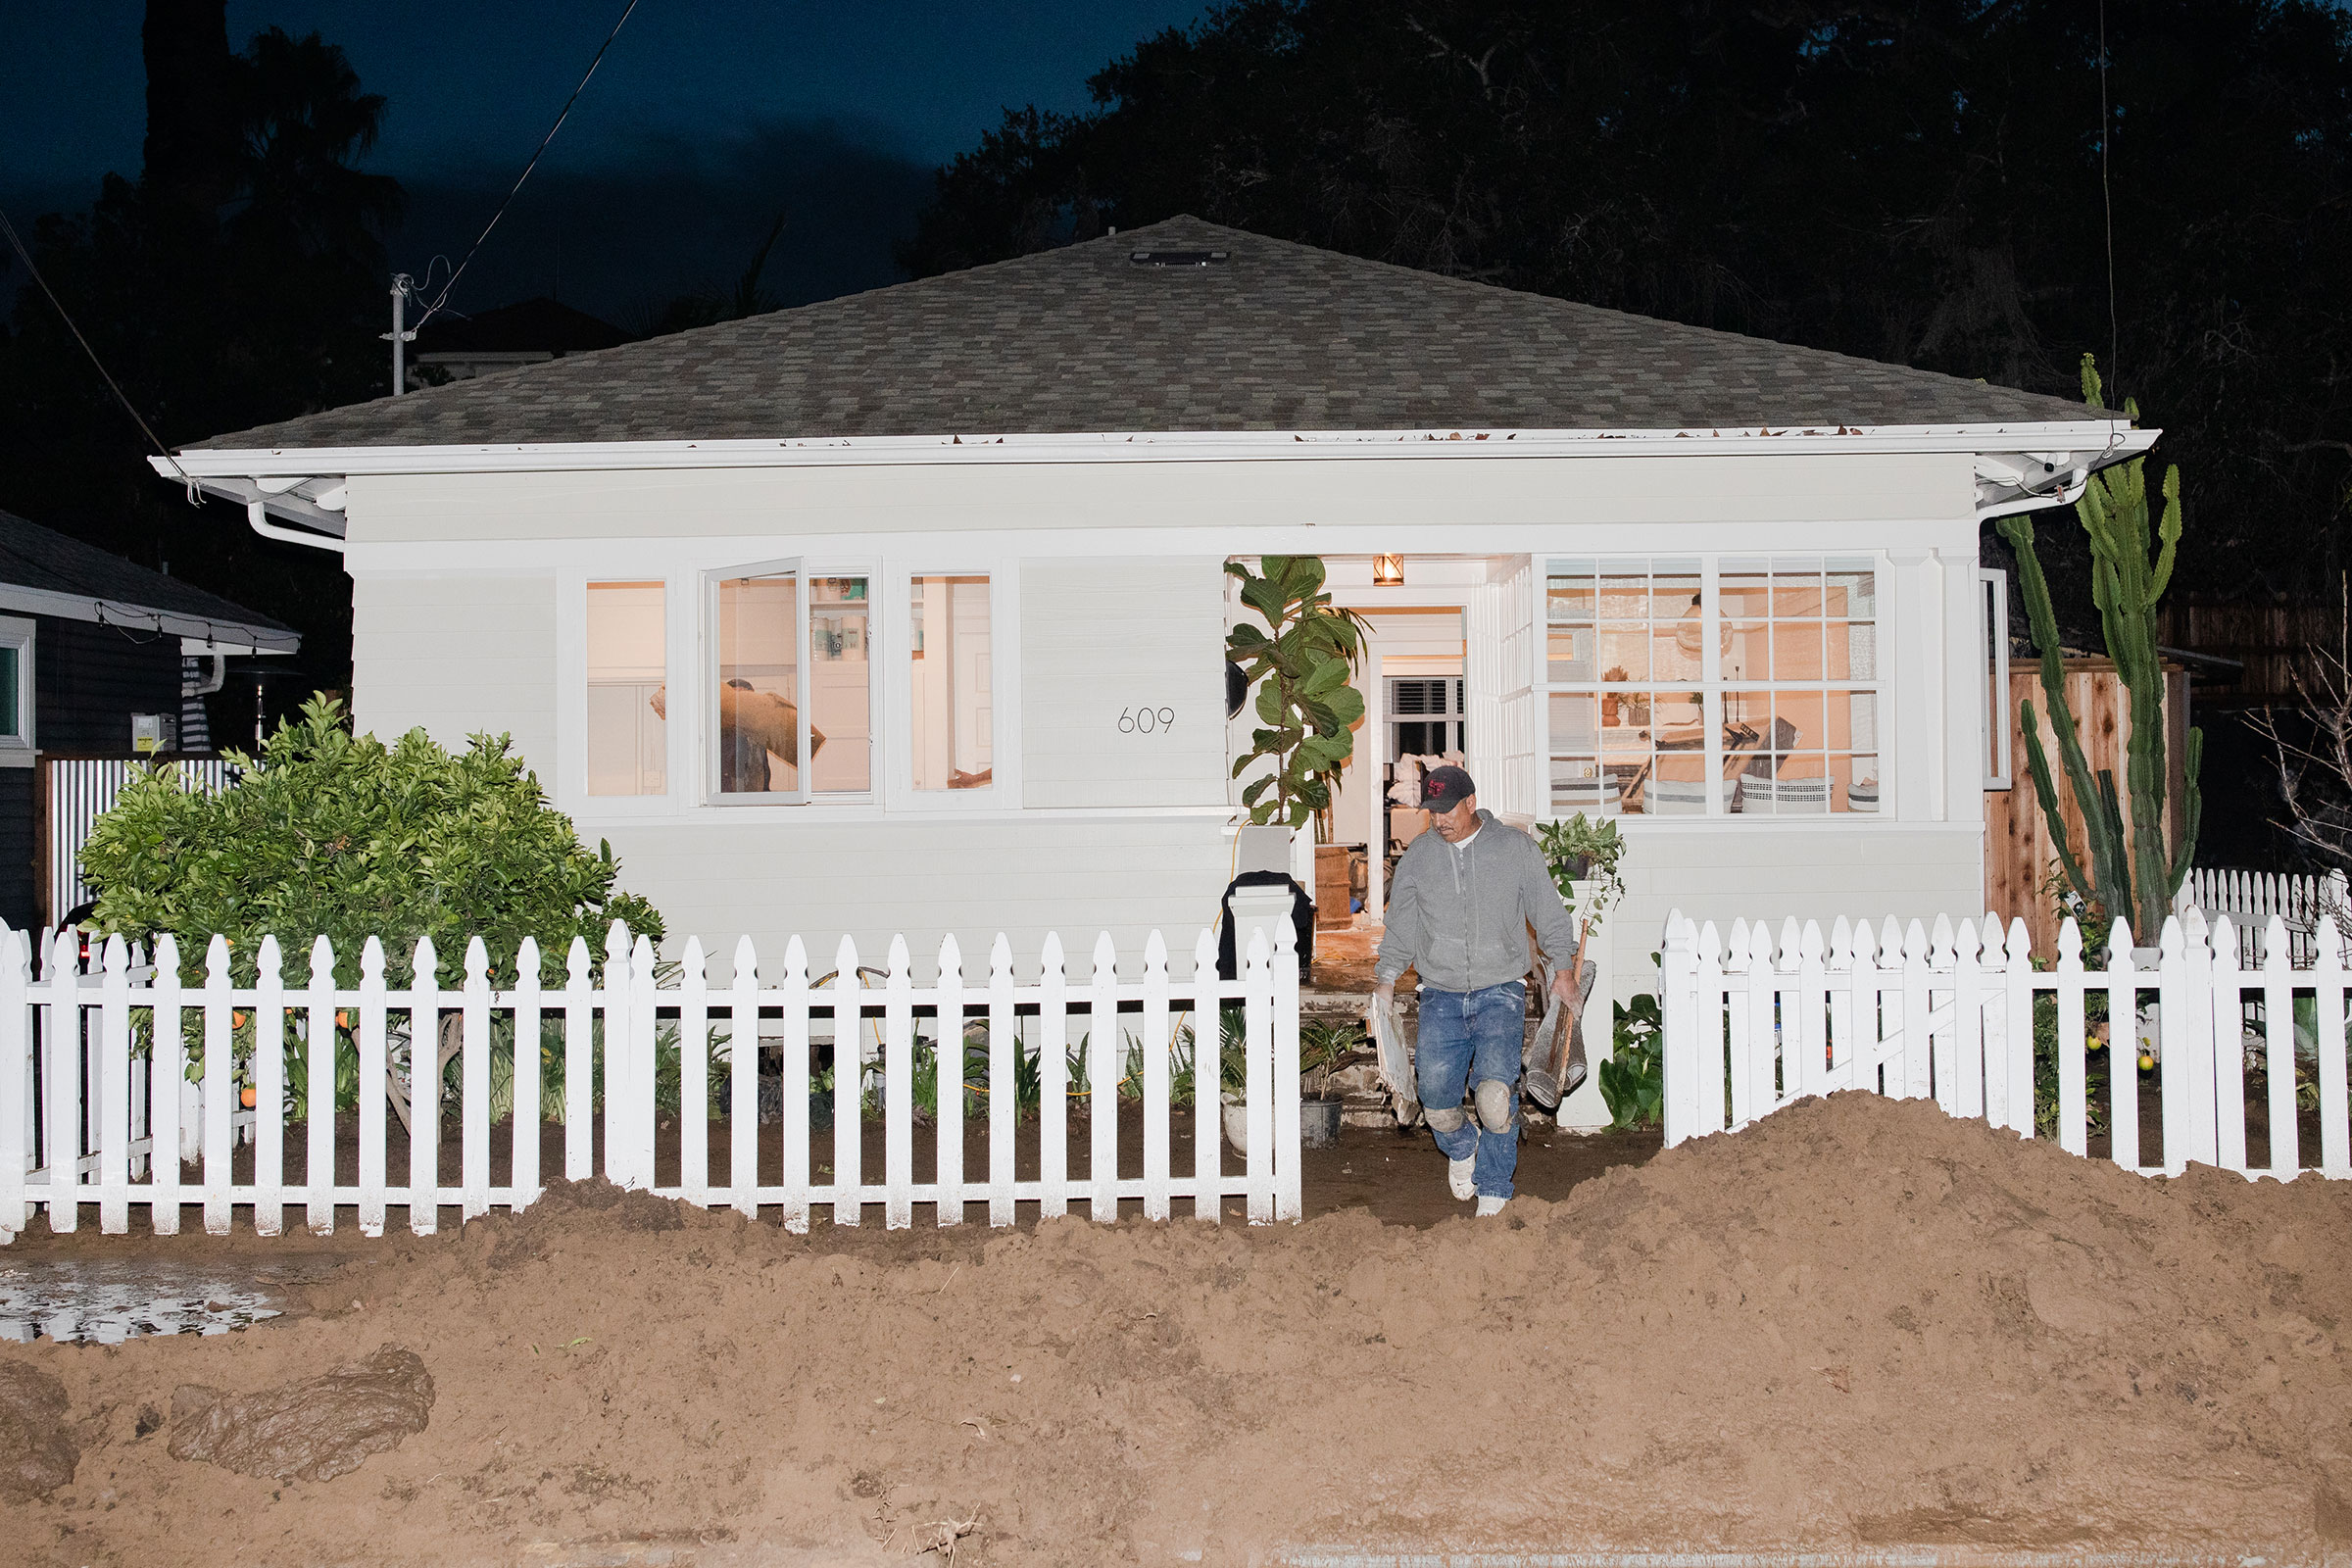 The cleanup of a damaged house in the aftermath of flooding on Bath Street in Santa Barbara on Jan. 10. (Alex Welsh for TIME)